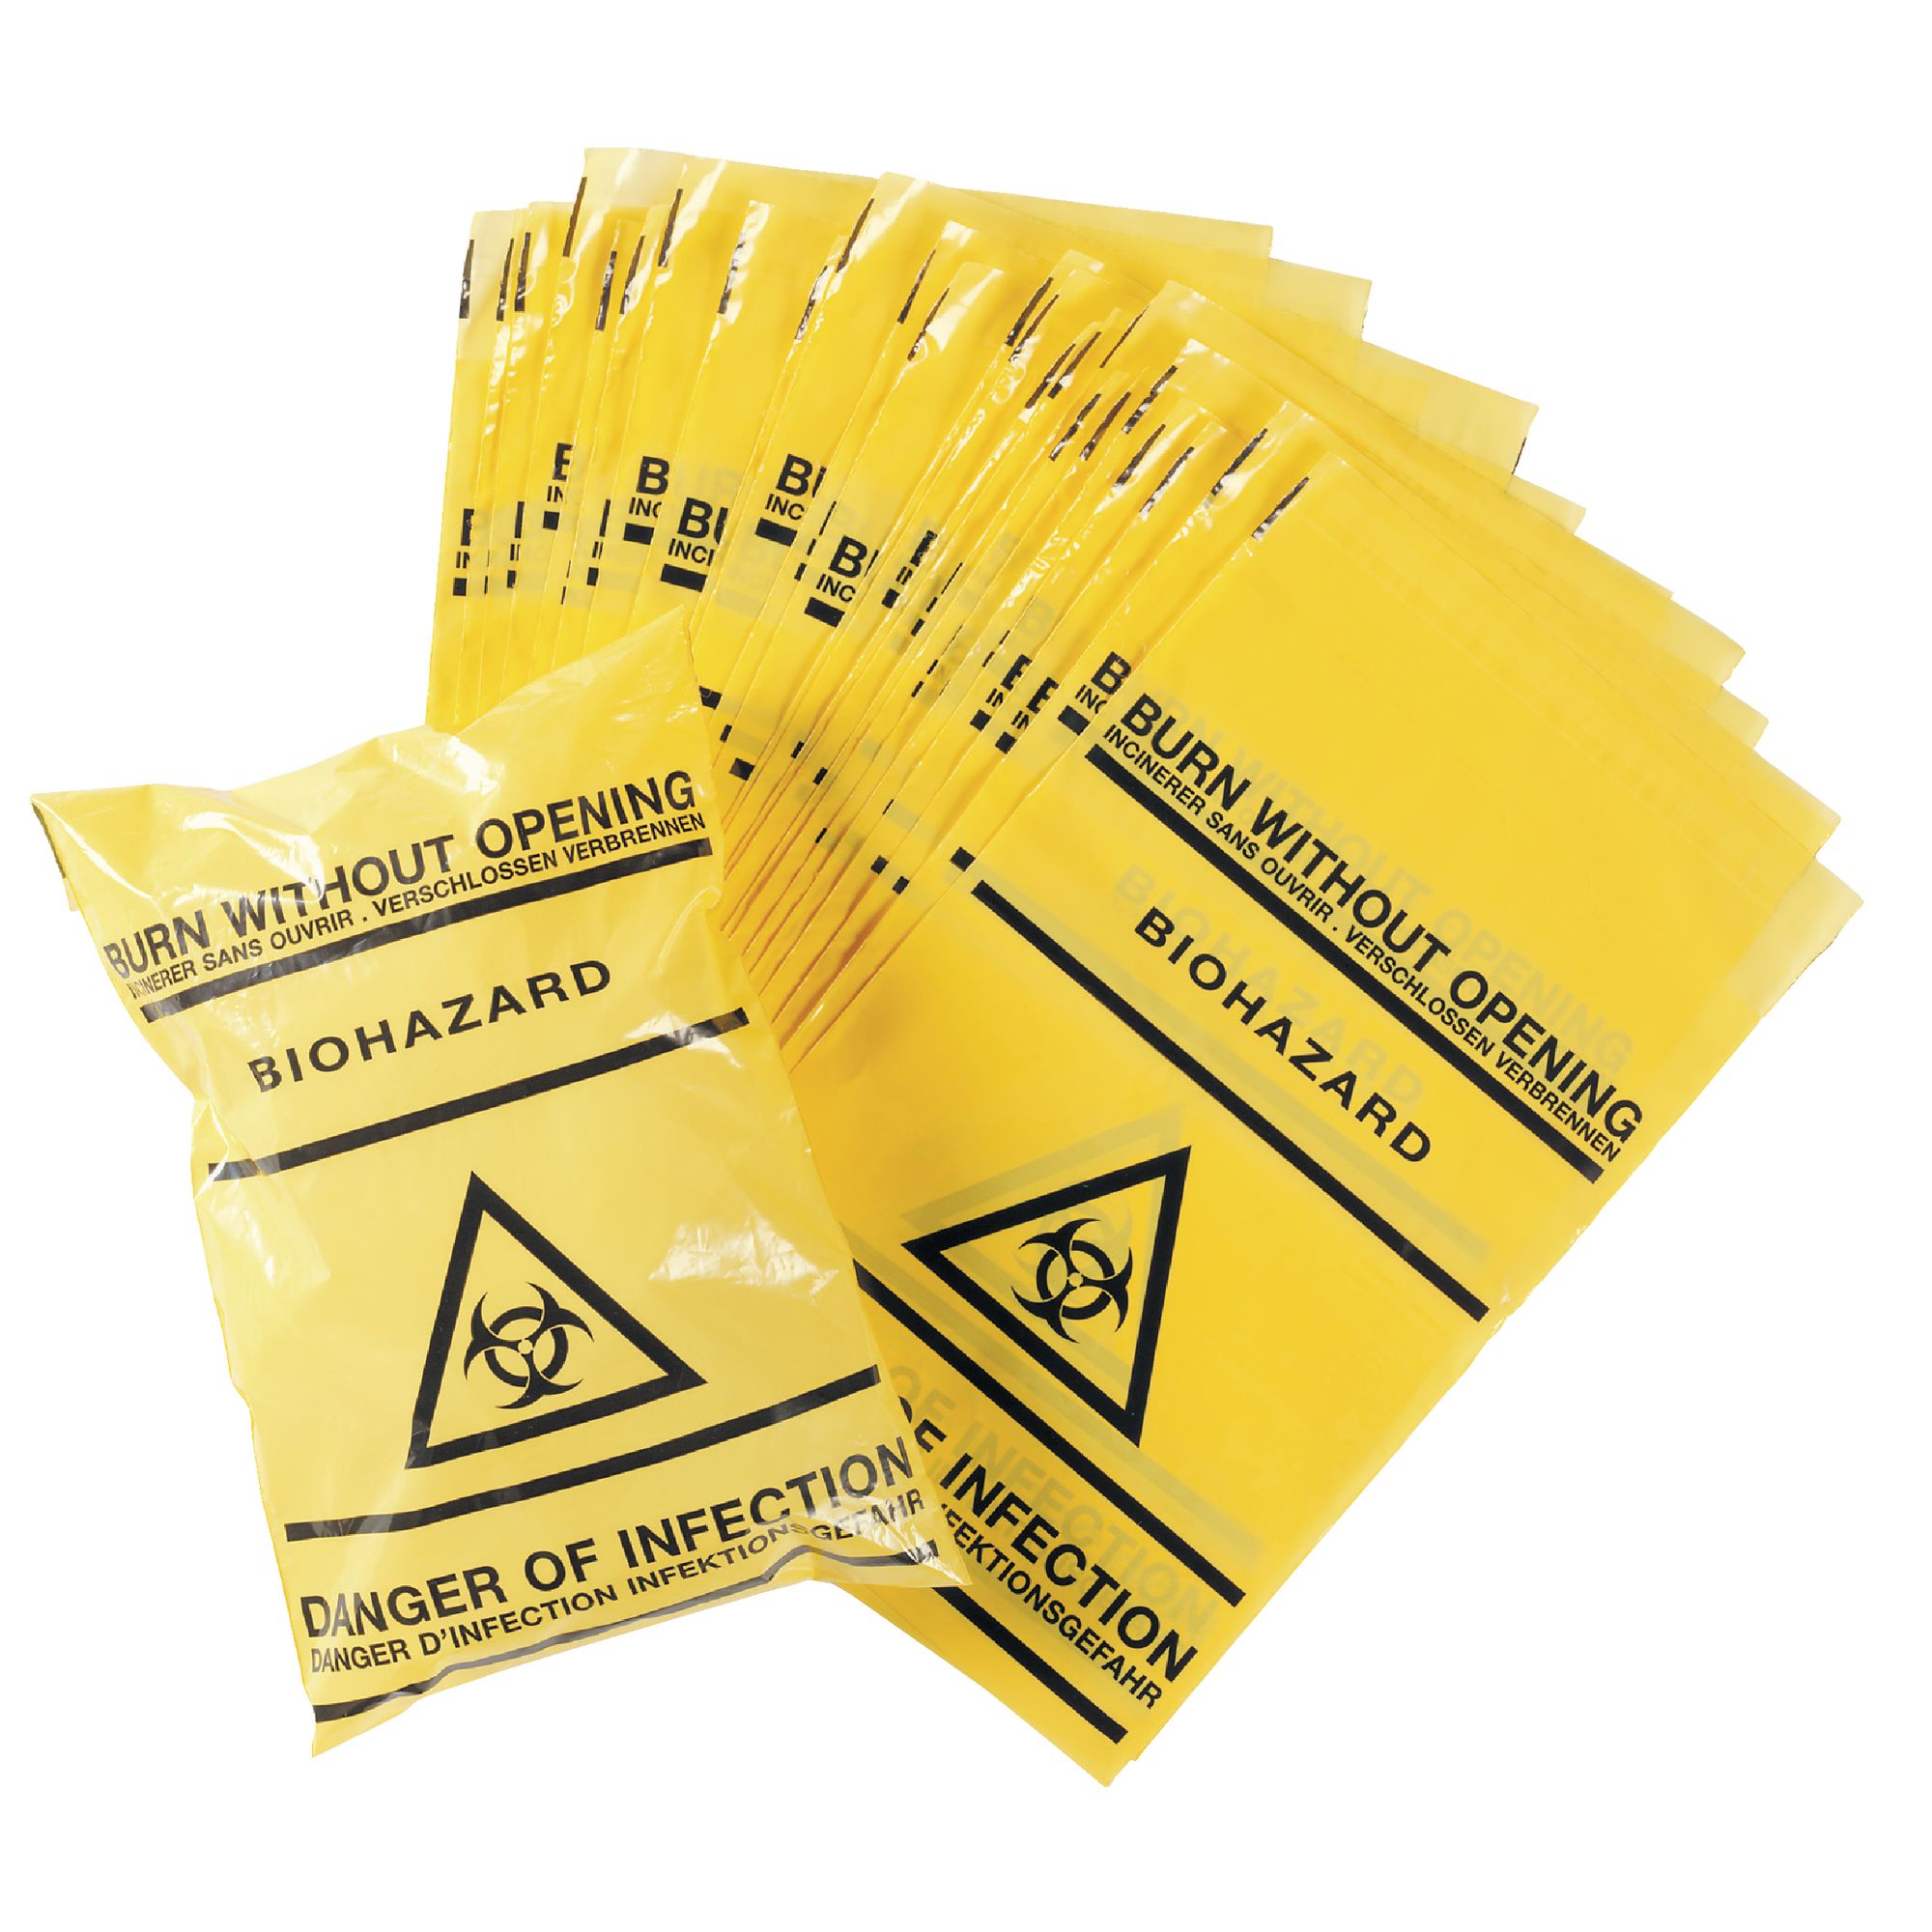 Biohazard Bags - Bio Medical Waste Bags Latest Price, Manufacturers &  Suppliers